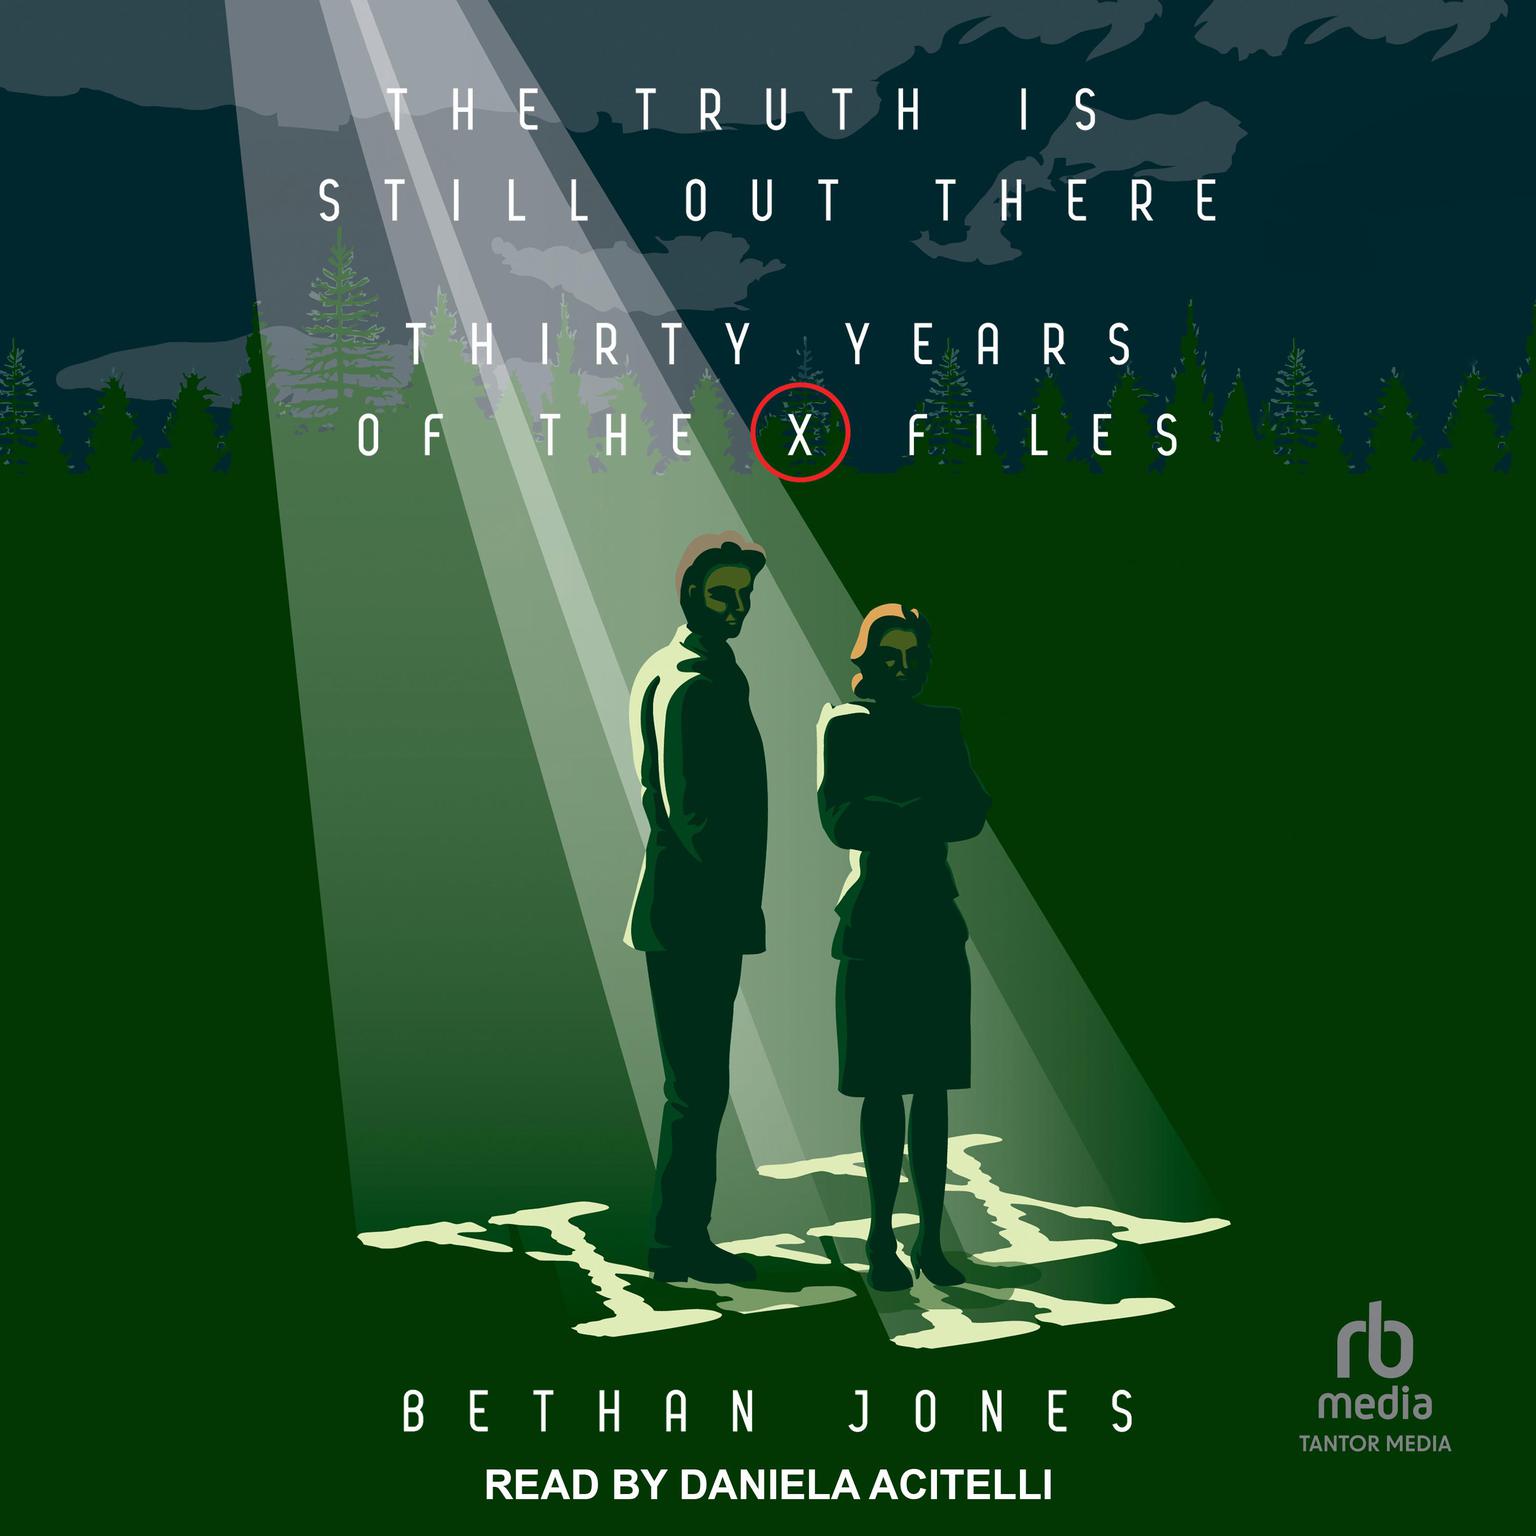 The Truth is Still Out There: Thirty Years of the X-Files: Thirty Years of the X-Files Audiobook, by Bethan Jones